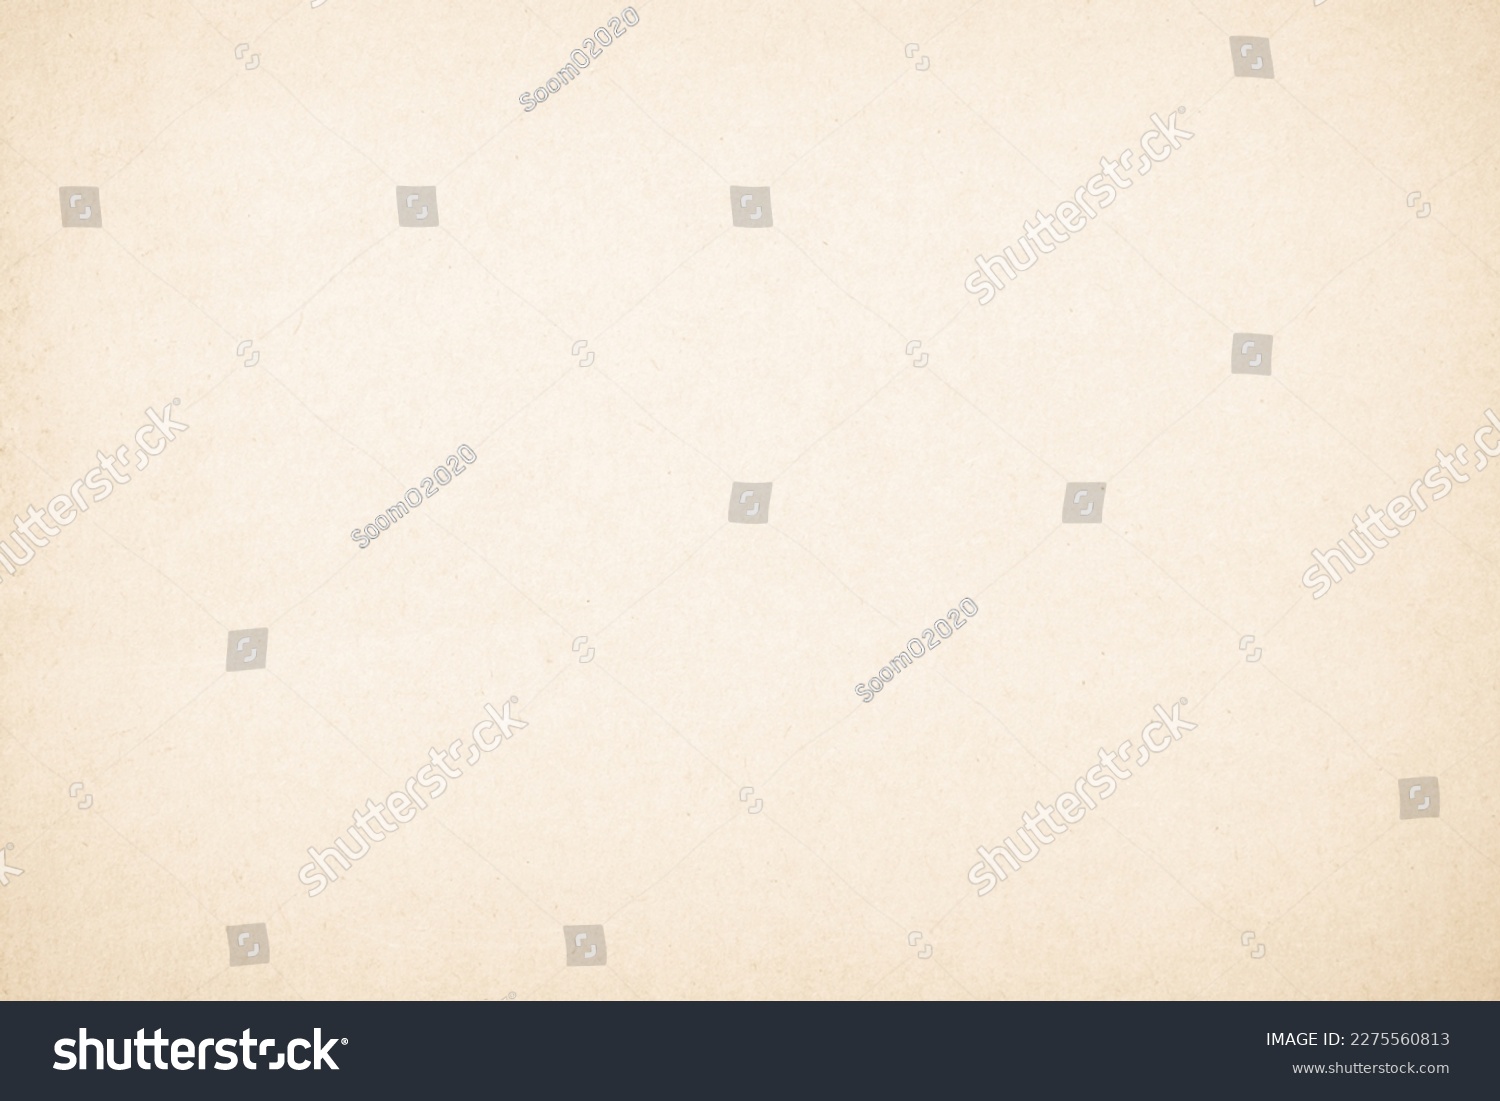 Brown recycled craft paper texture as background. Cream paper texture, Old vintage page or grunge vignette. Pattern rough art creased grunge letter. Hardboard with copy space for text. #2275560813